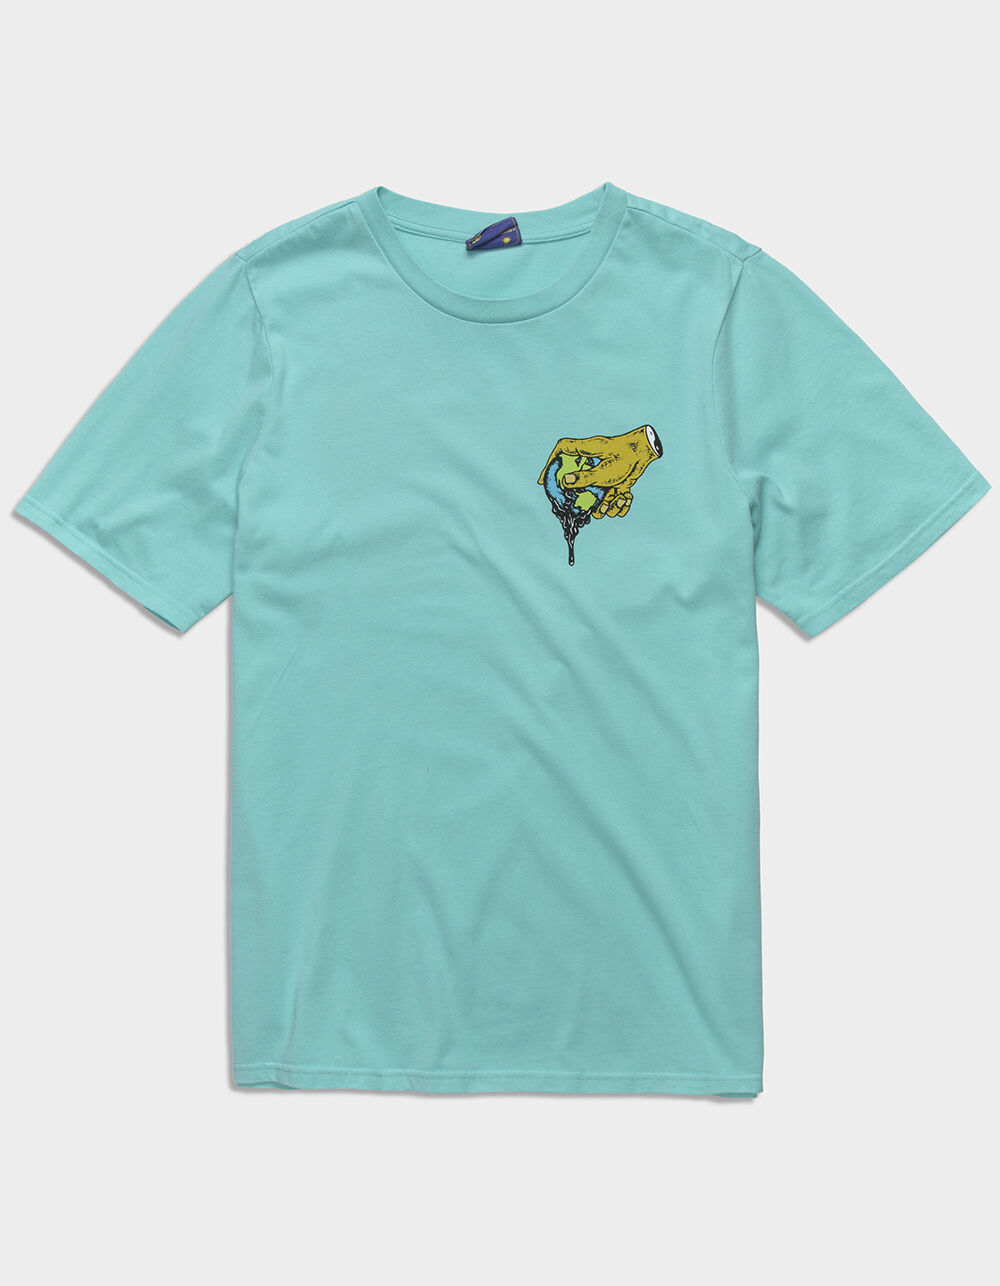 CONEY ISLAND PICNIC Worth The Squeeze Mens Tee - TEAL BLUE | Tillys